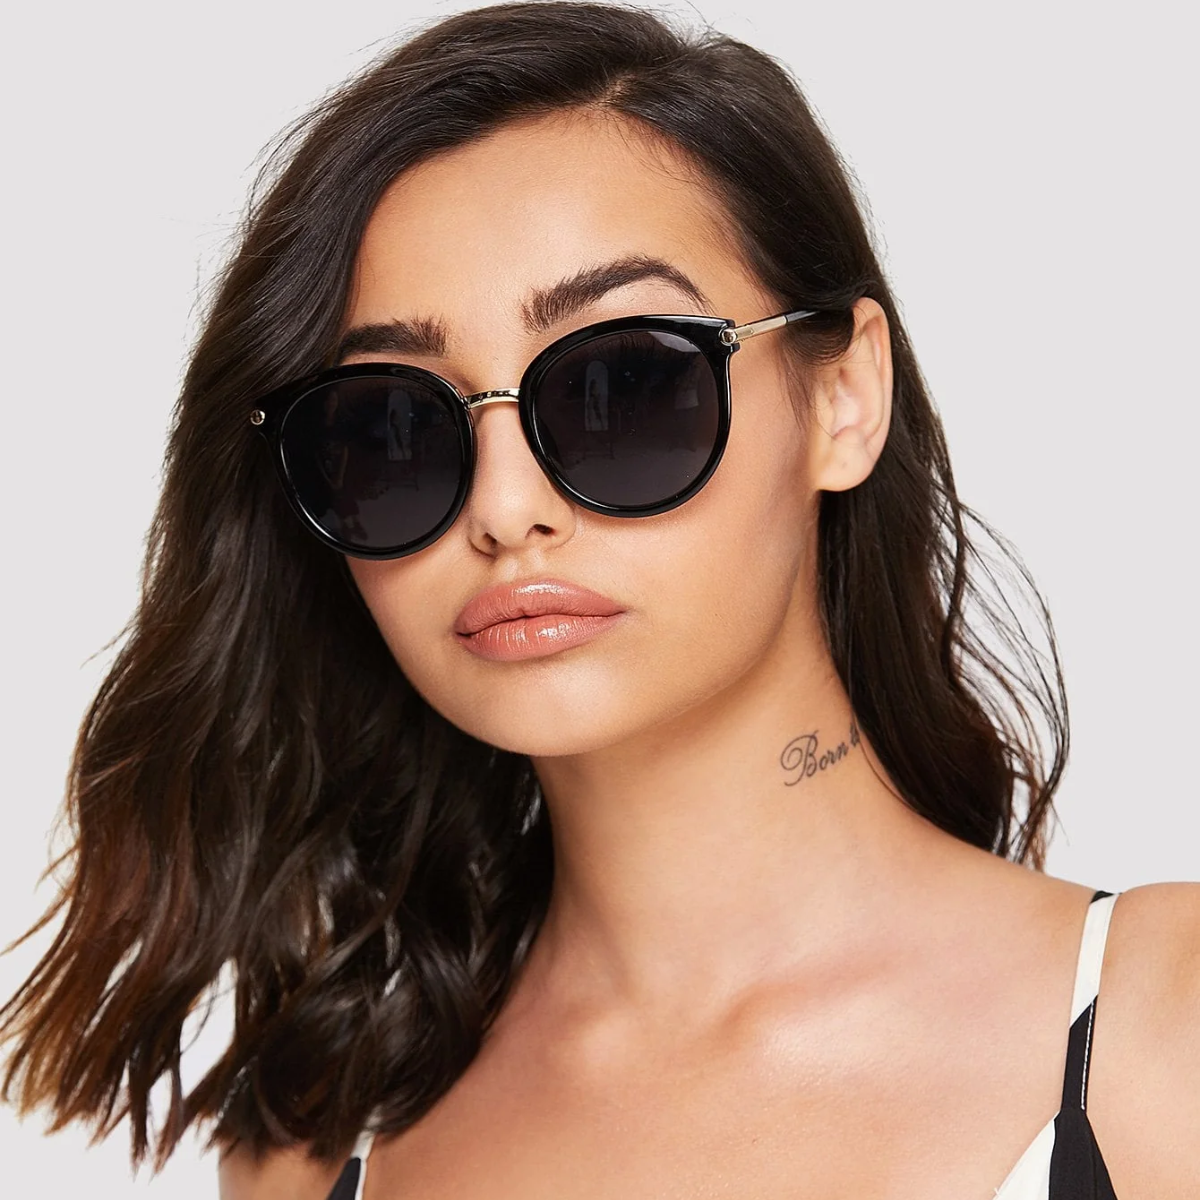 Buy the Best Stylish "Sunglasses for Women Online at Optorium"